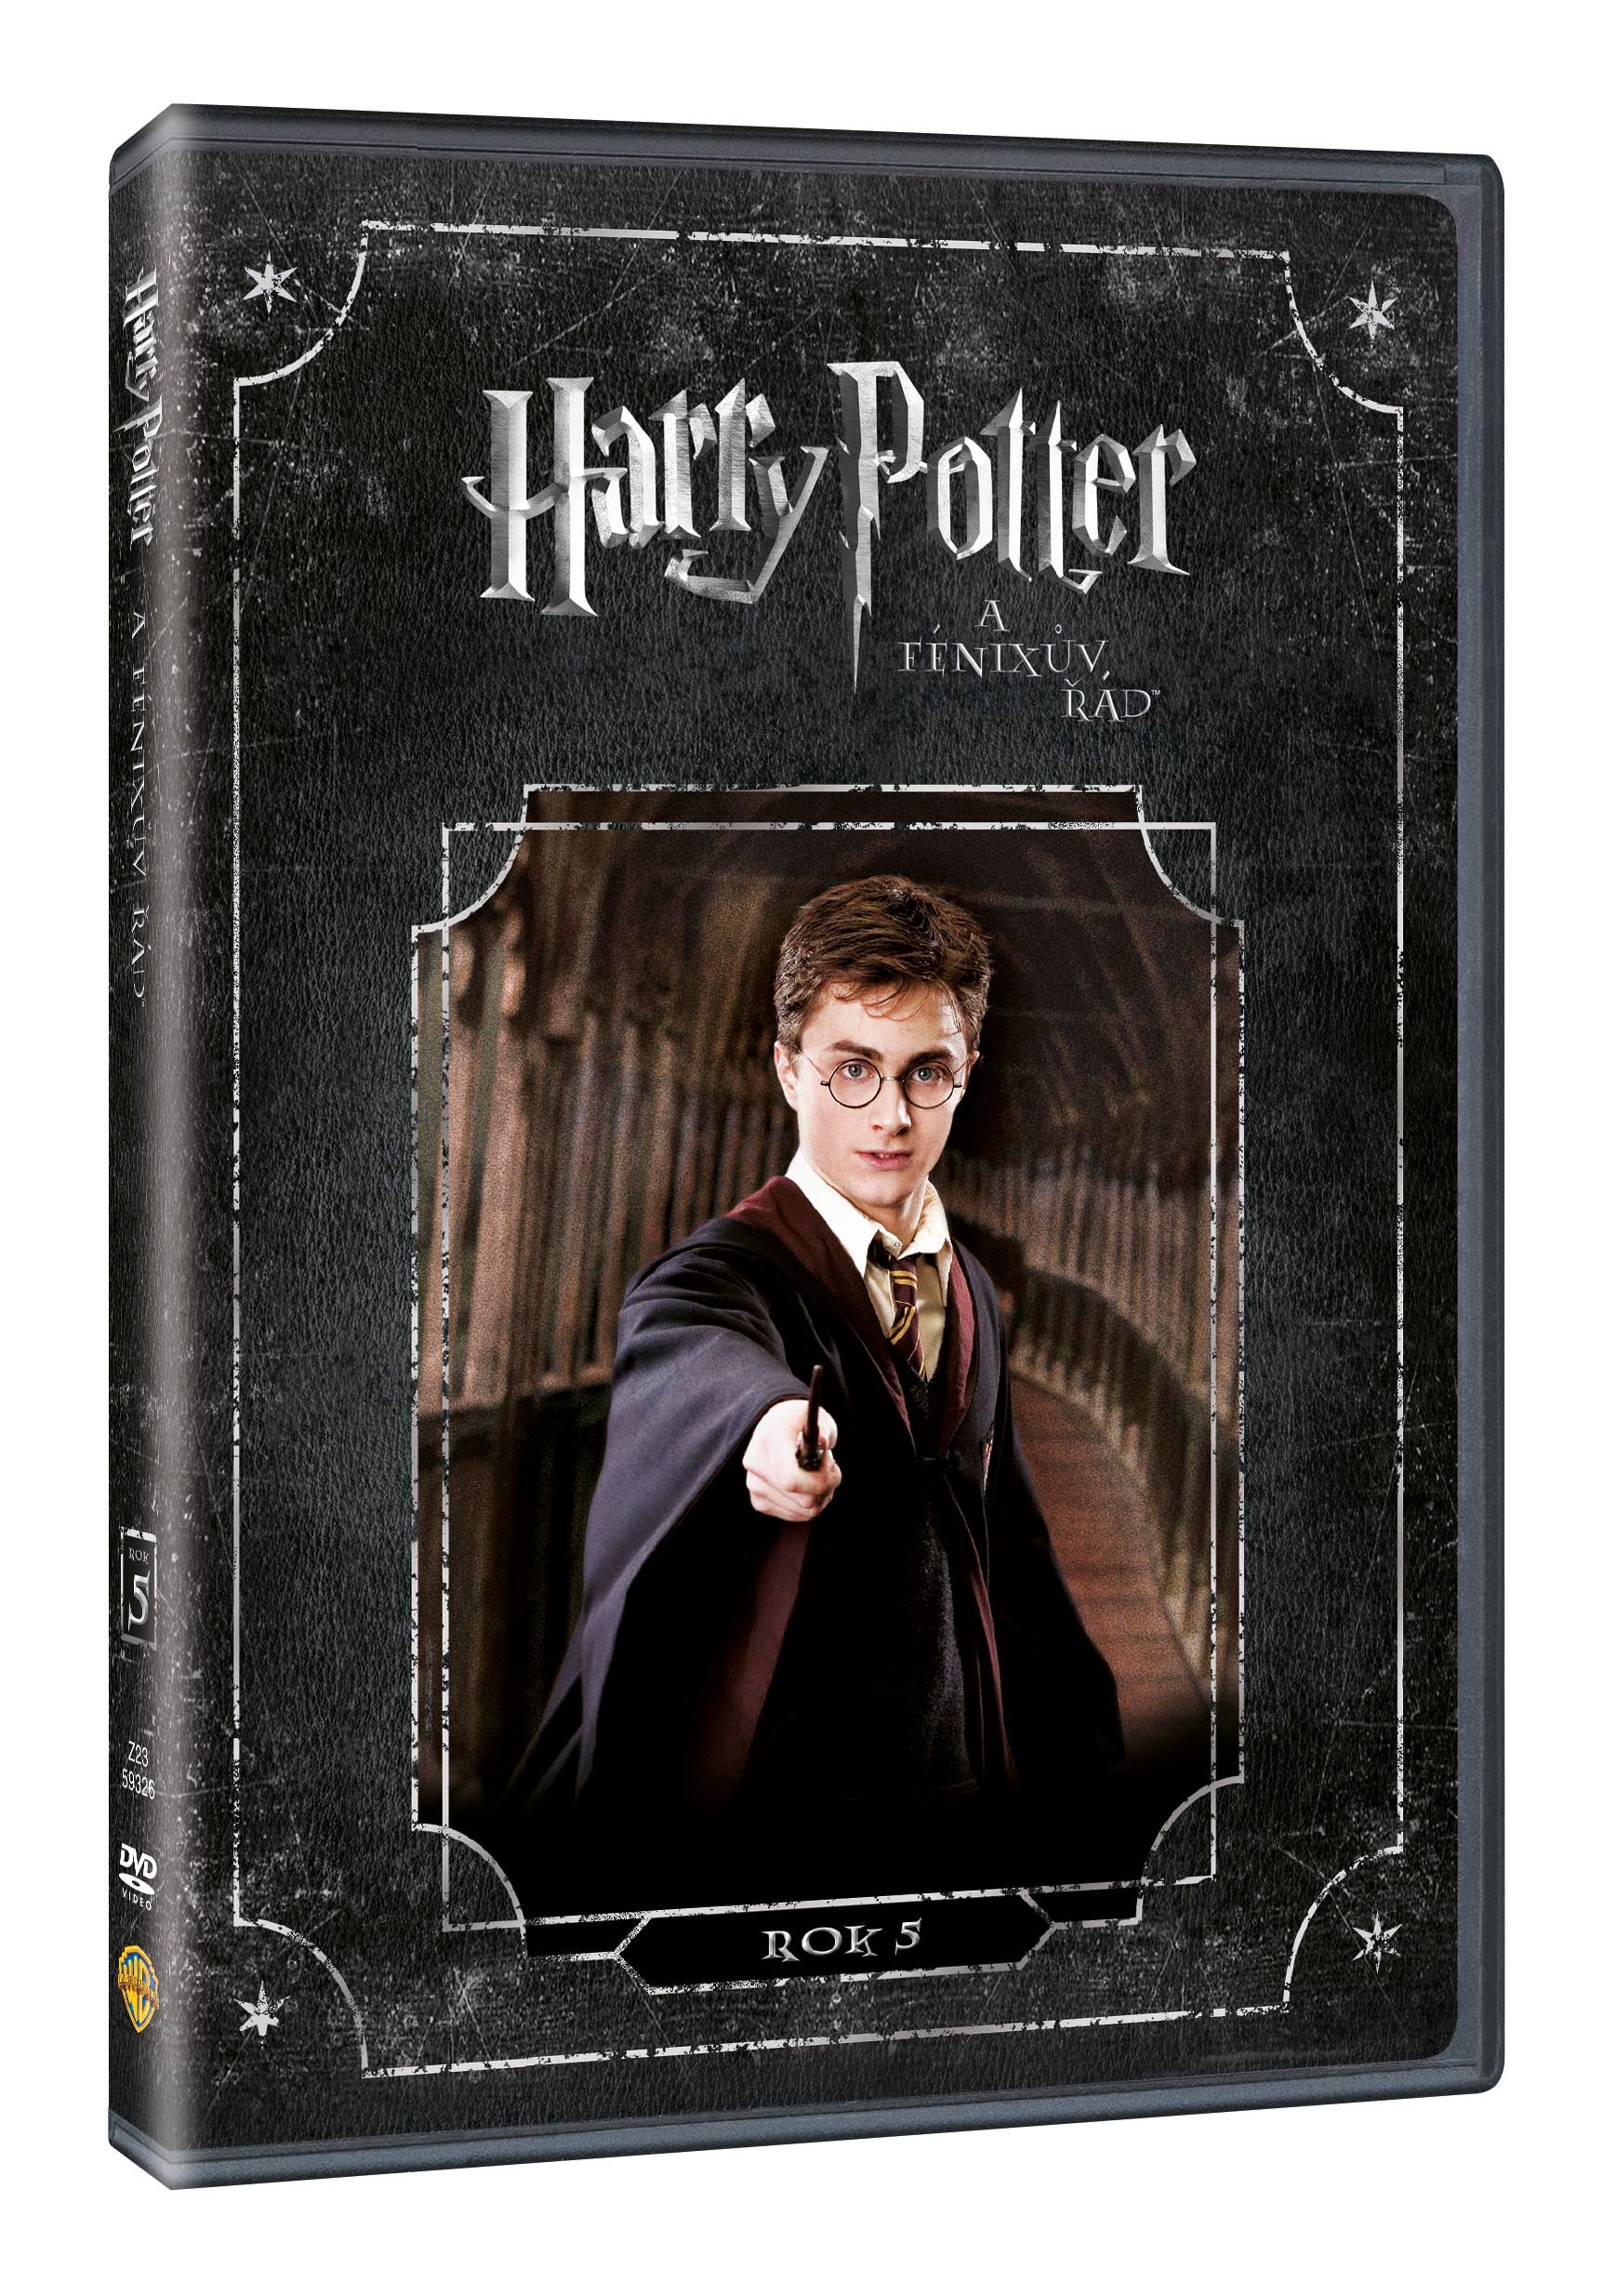 Harry Potter a Fenixuv rad DVD / Harry Potter and the Order of the Phoenix